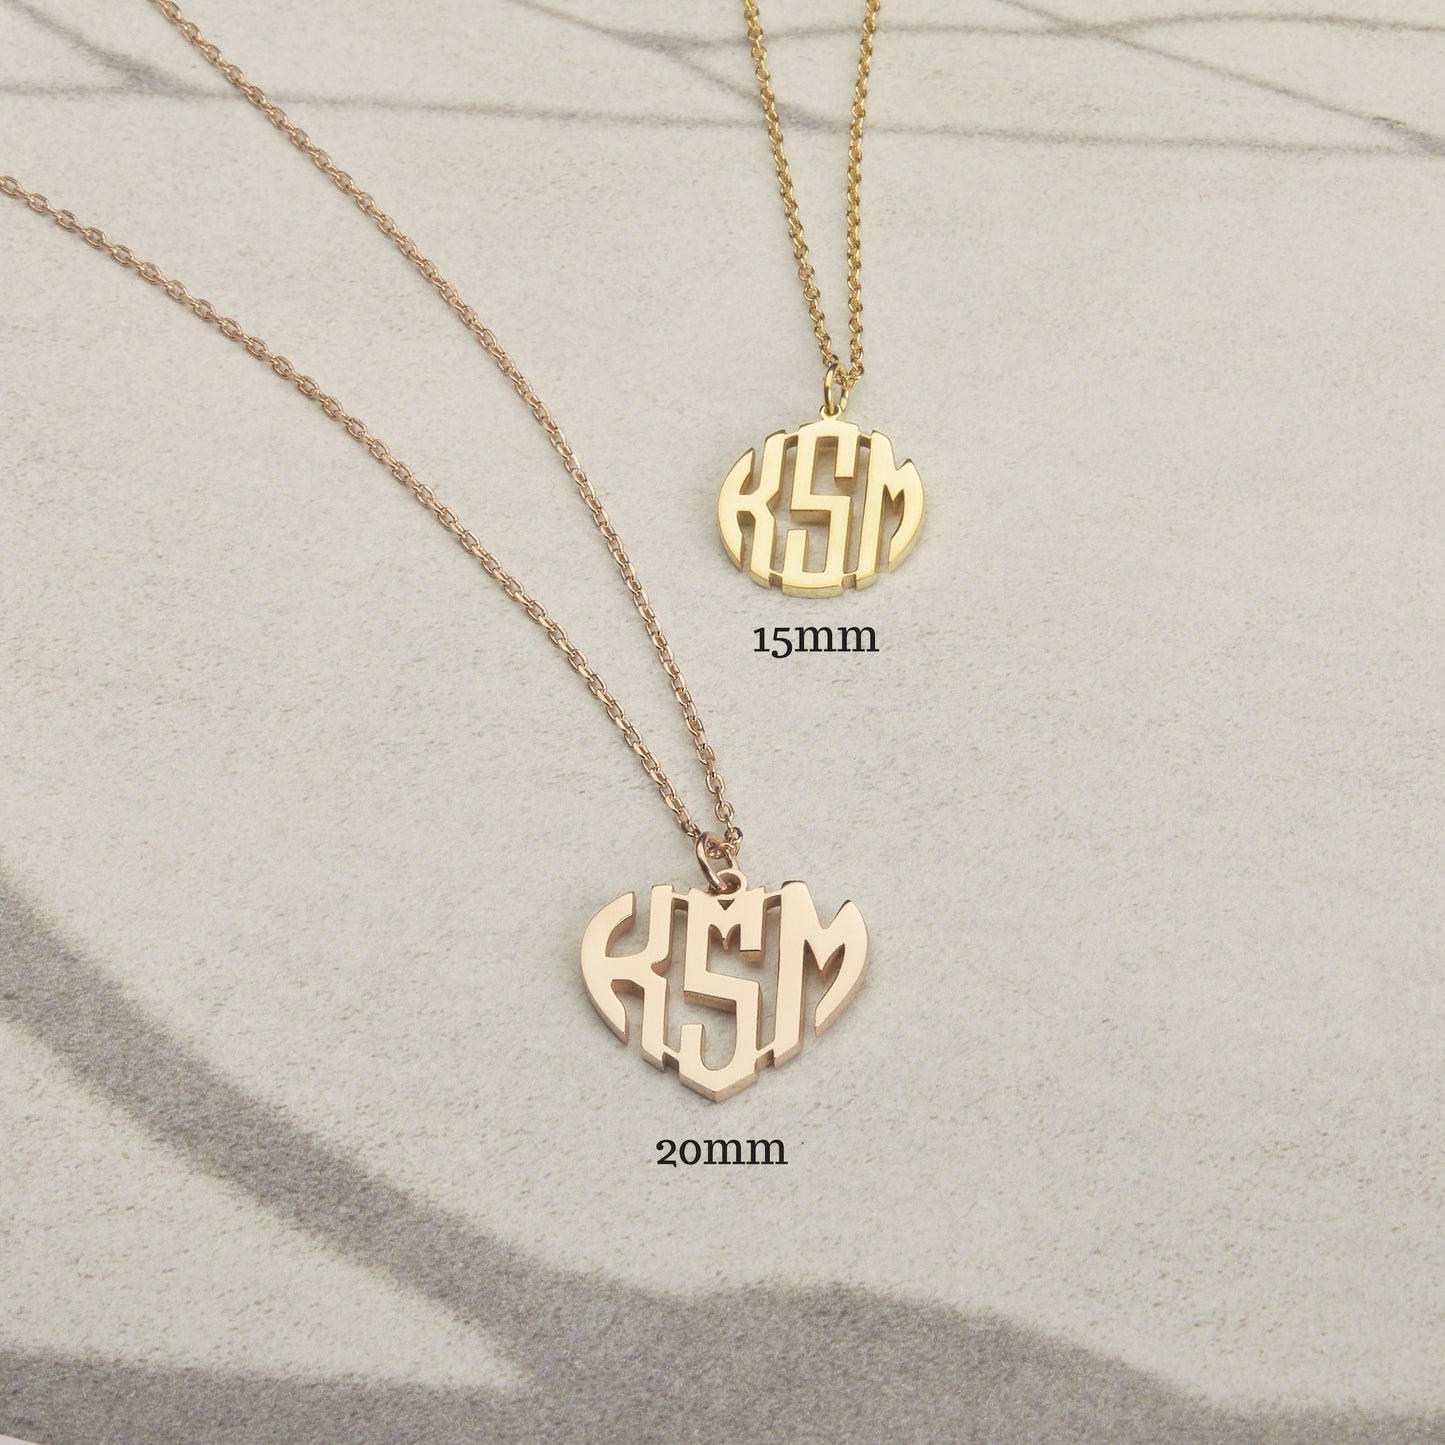 Custom Monogram Necklace | Name Initials Necklace | Children Name Necklace | Monogrammed Gifts | Monogrammed Heart Necklace | Gift for her